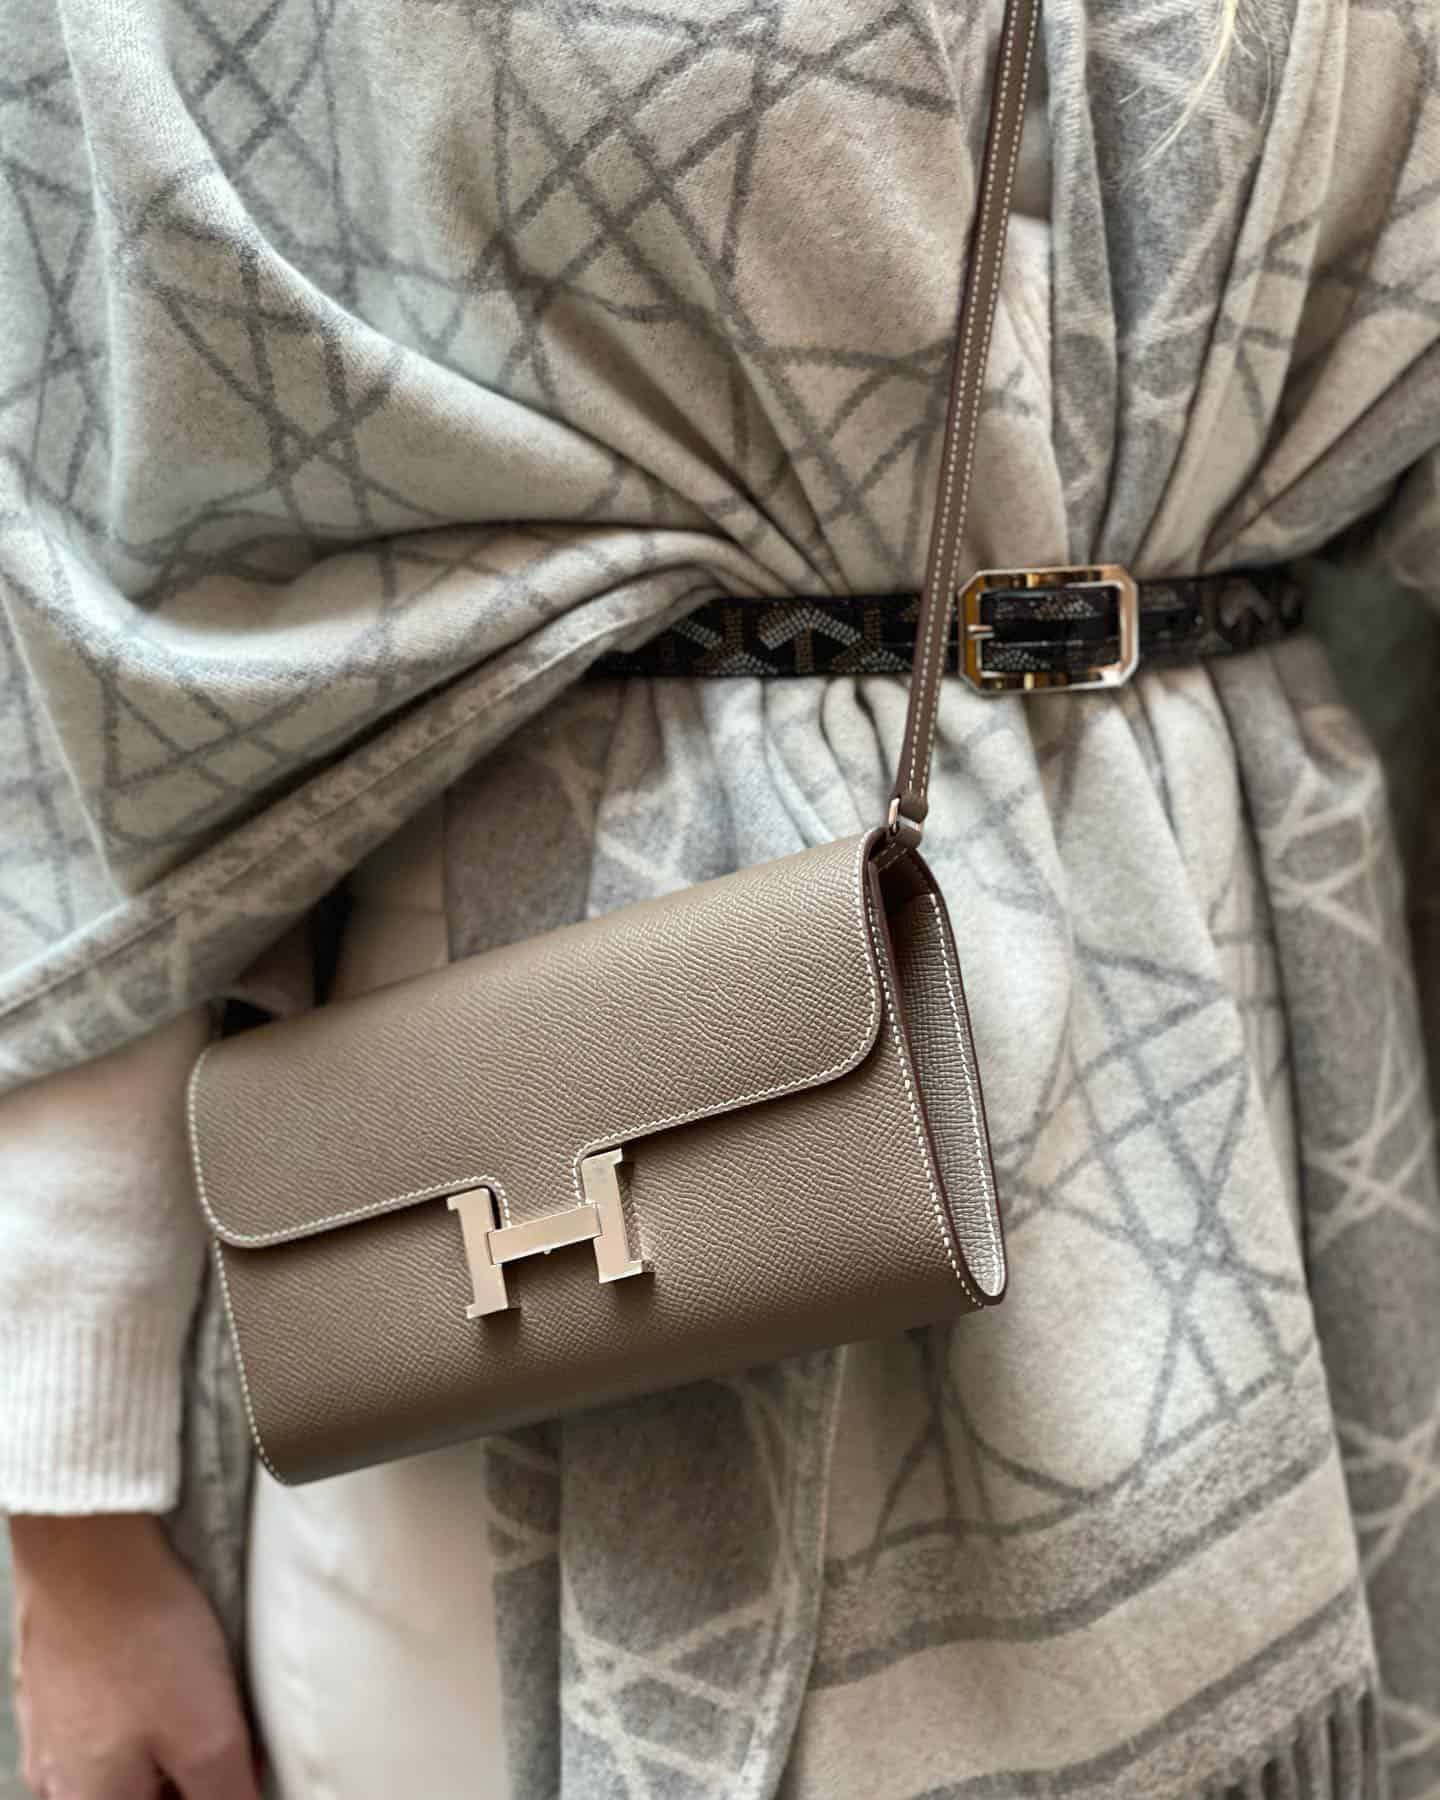 Are Hermes bag worth their high price